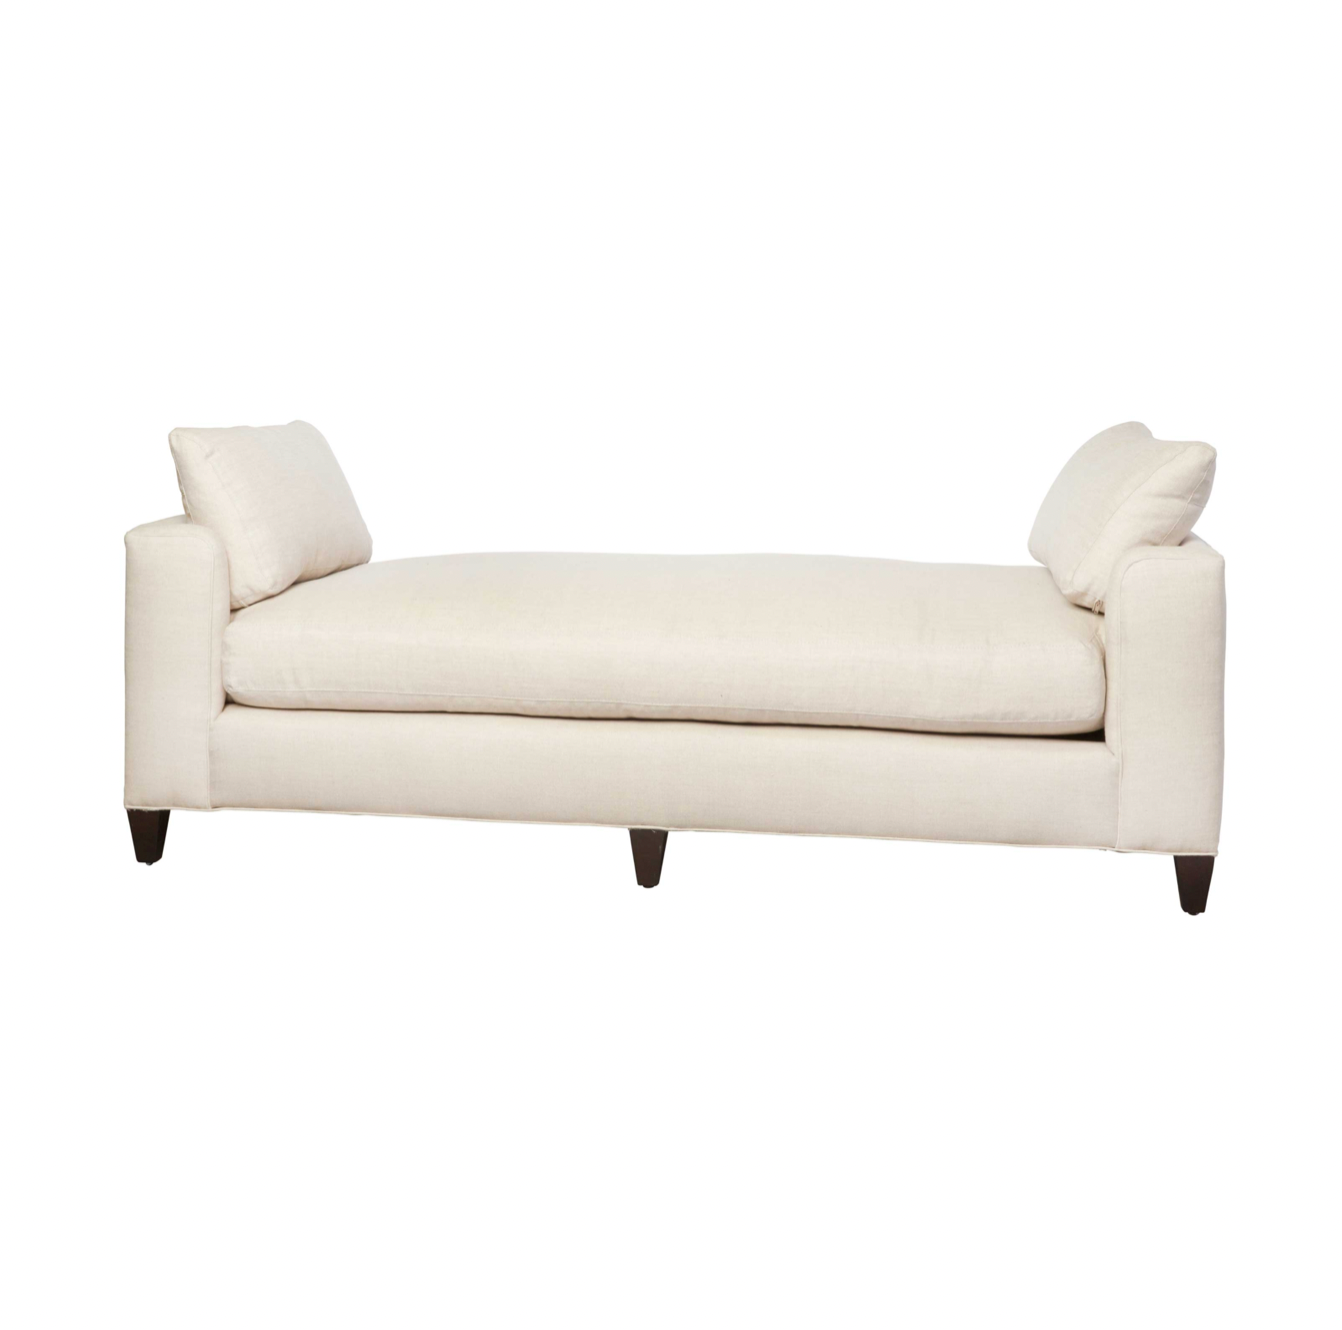 The Cisco Brothers Gunner Daybed 72" is designed and constructed in Los Angeles. The clean lines and comfy seat make this the perfect daybed to have in your office, lounge area, or other area of your home.   Size: 72"w x 23"h x 30"d